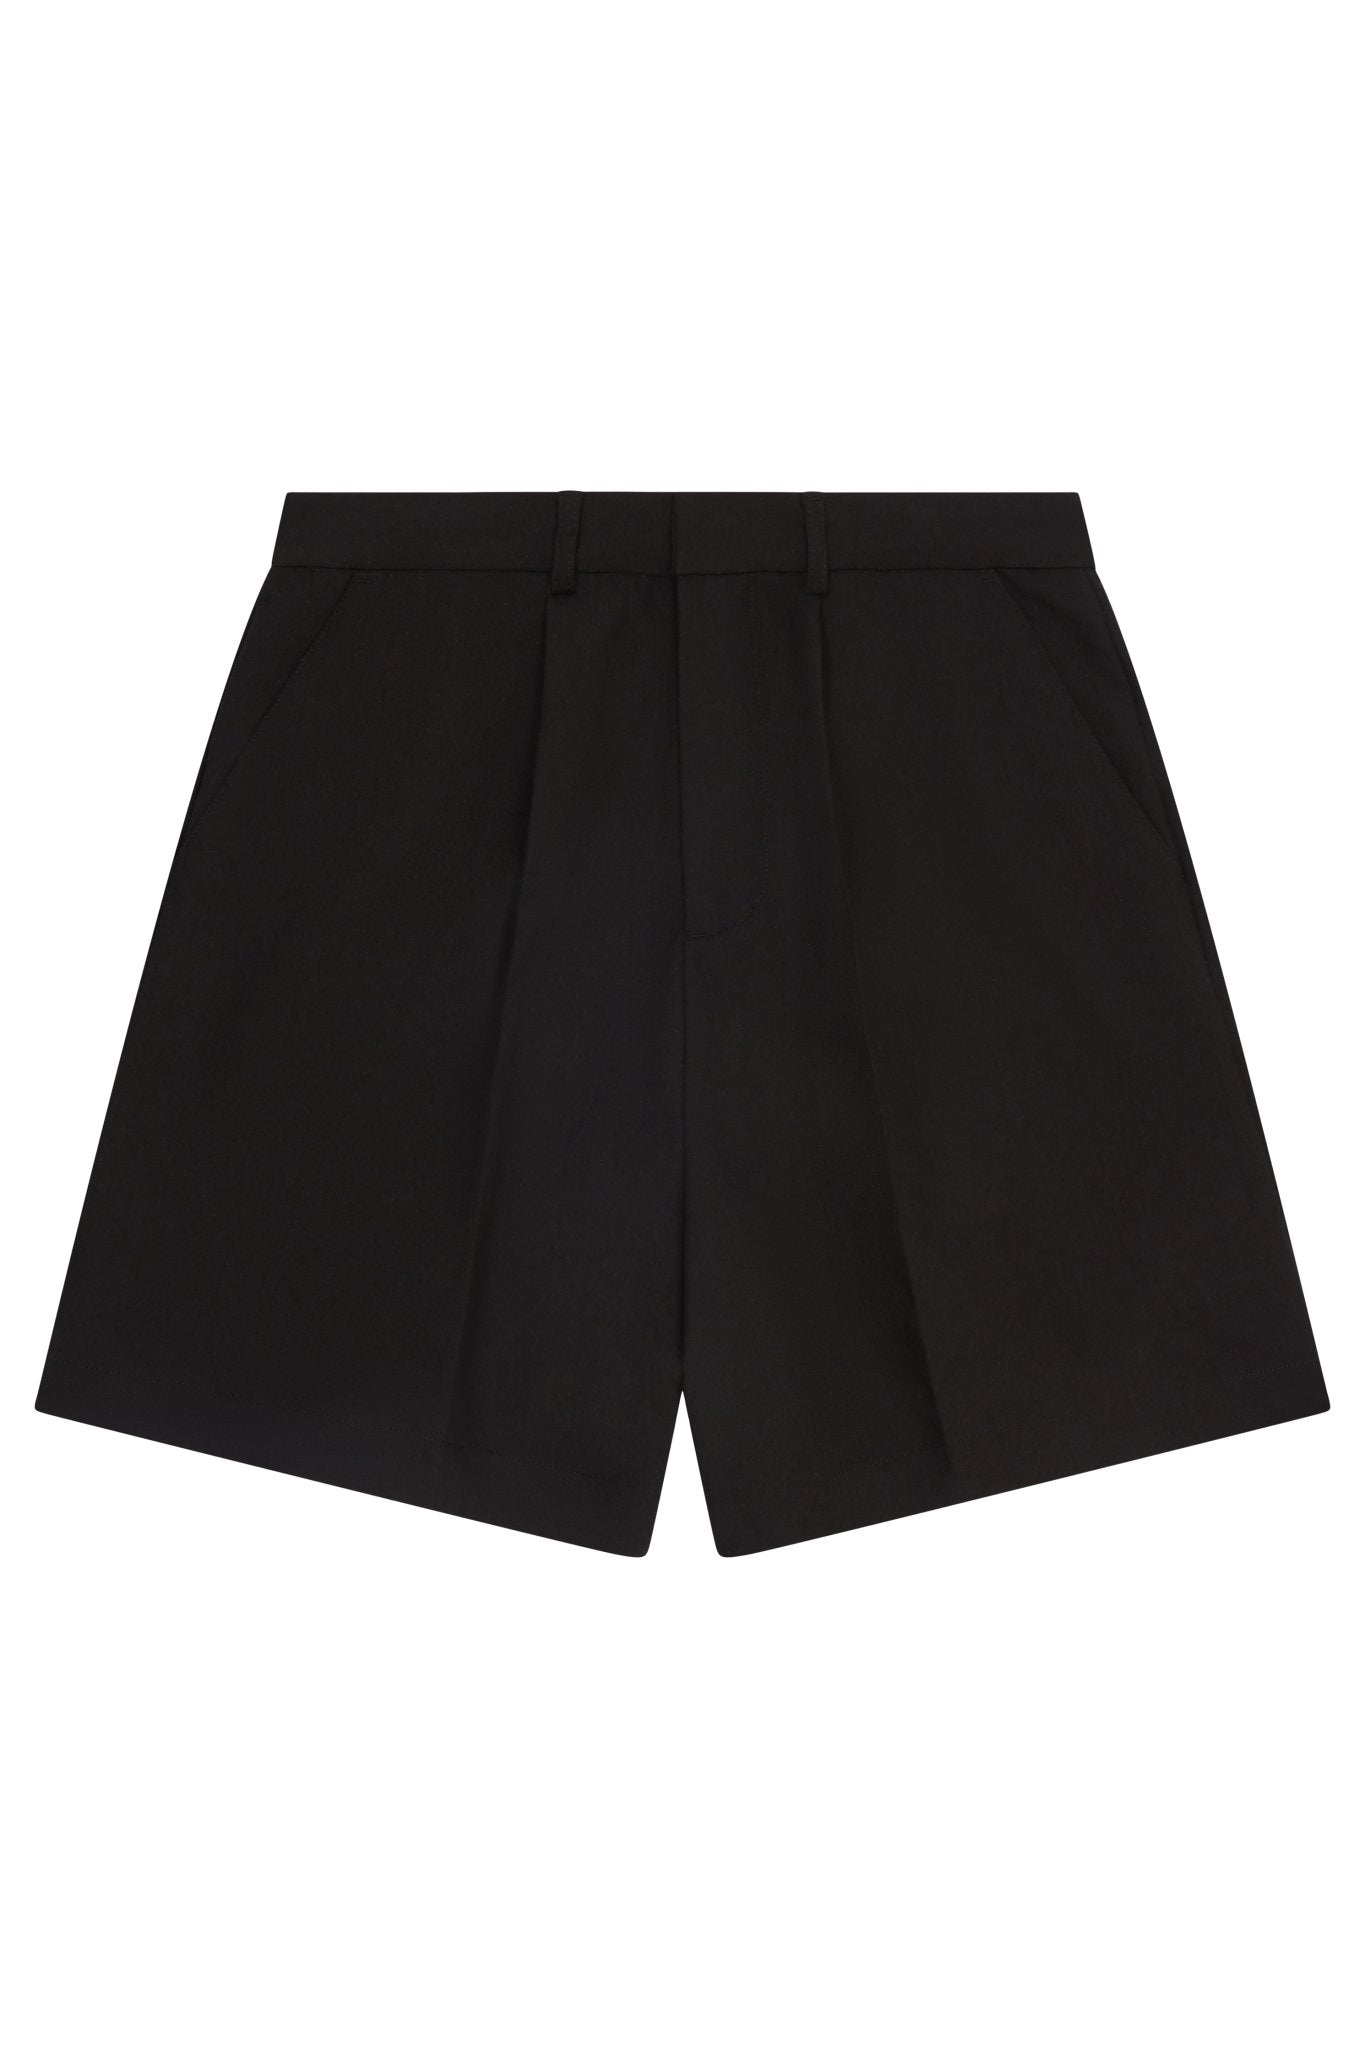 about---blank.combermuda short black